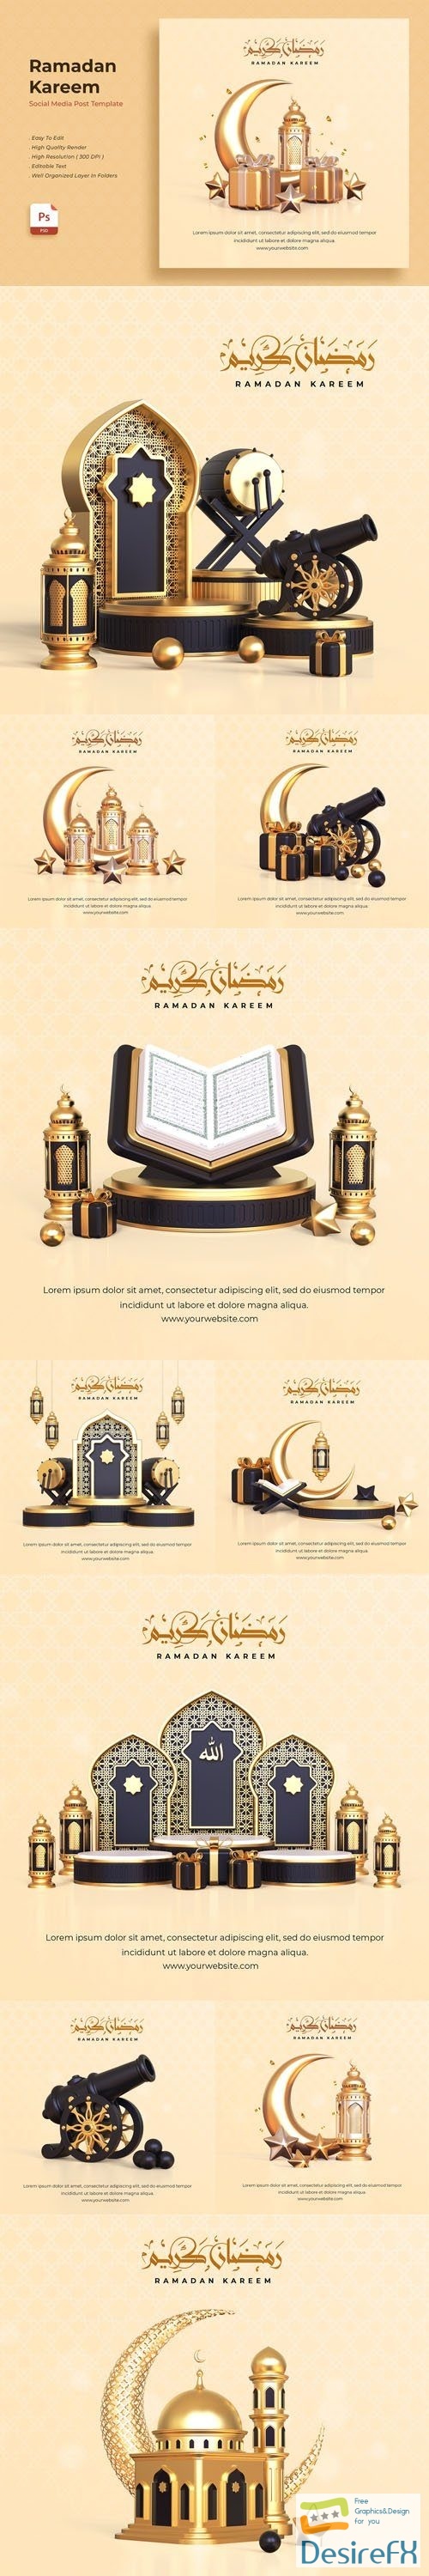 Realistic 3D Composition of Ramadan Greetings - PSD Templates Collection